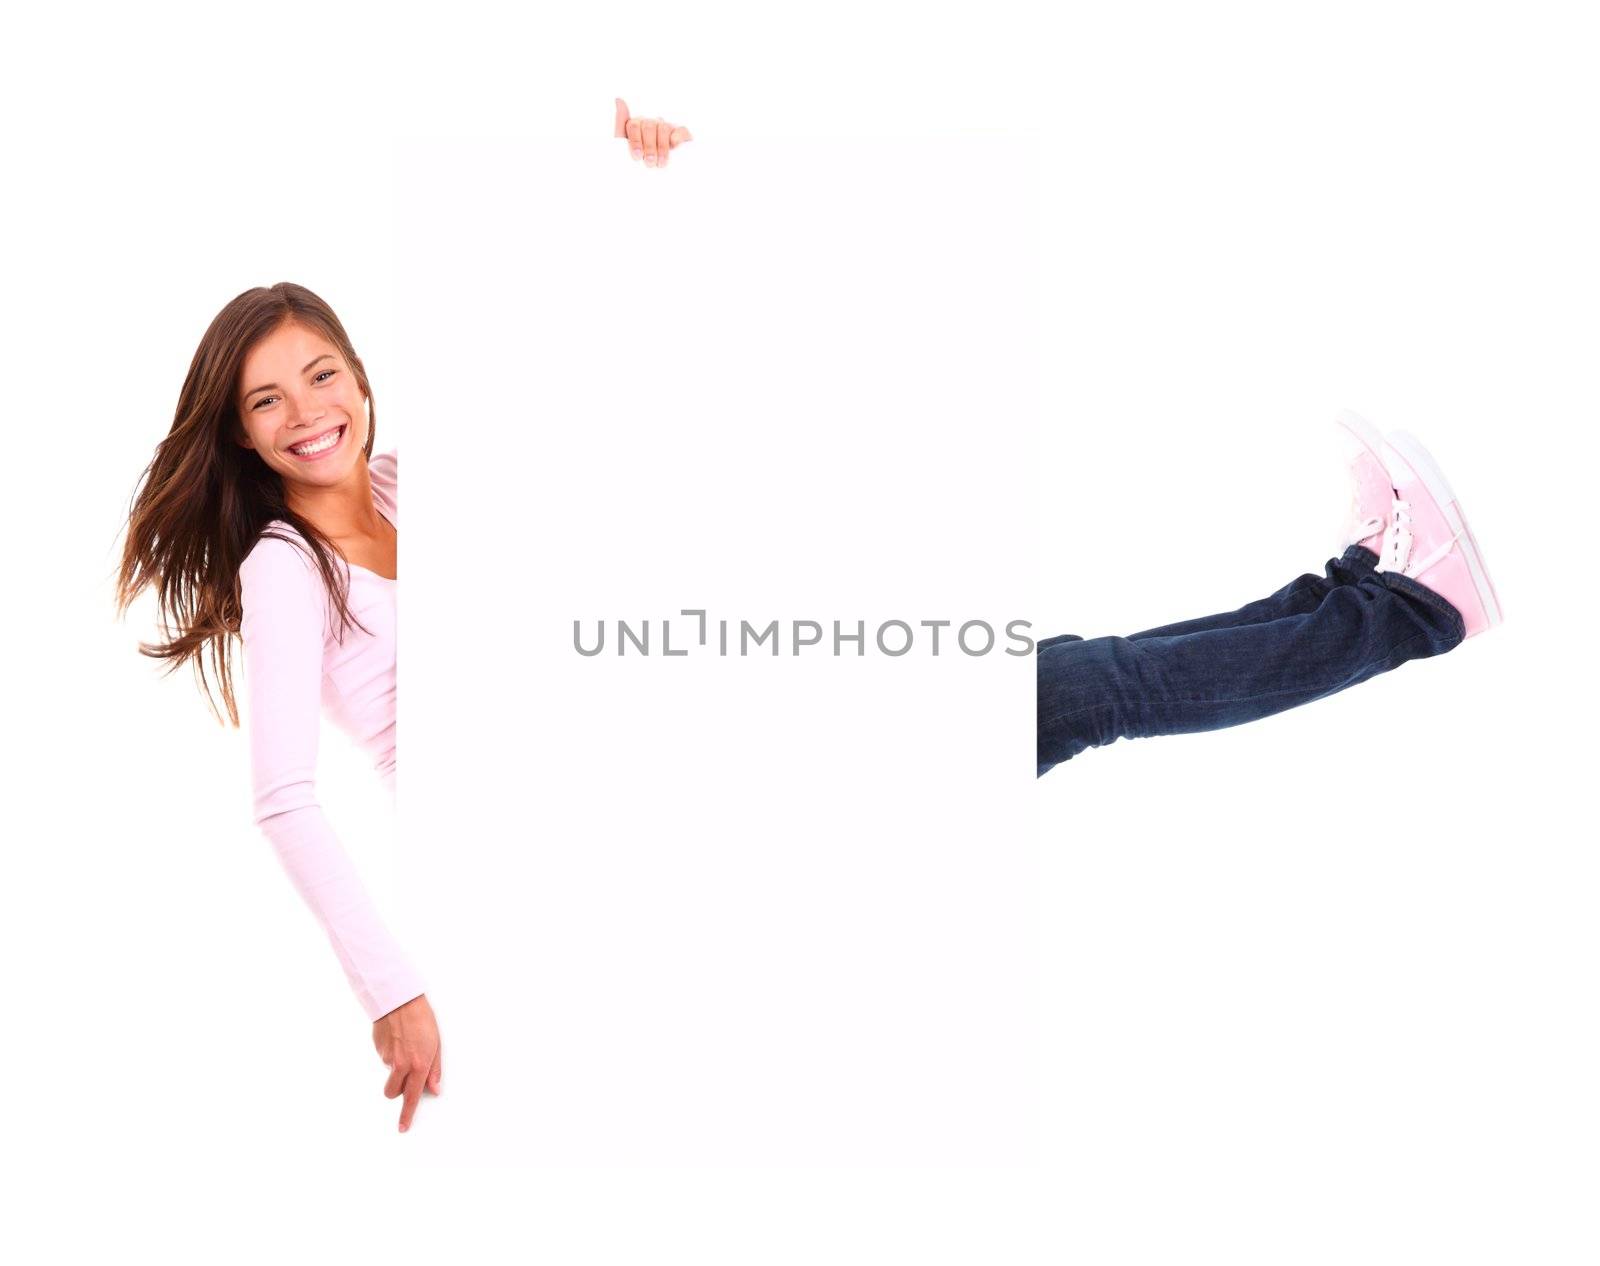 Funny sign / billboard. Funny full length image of woman holding a white blank board / placard. Beautiful mixed race asian / caucasian model. Isolated on white background.